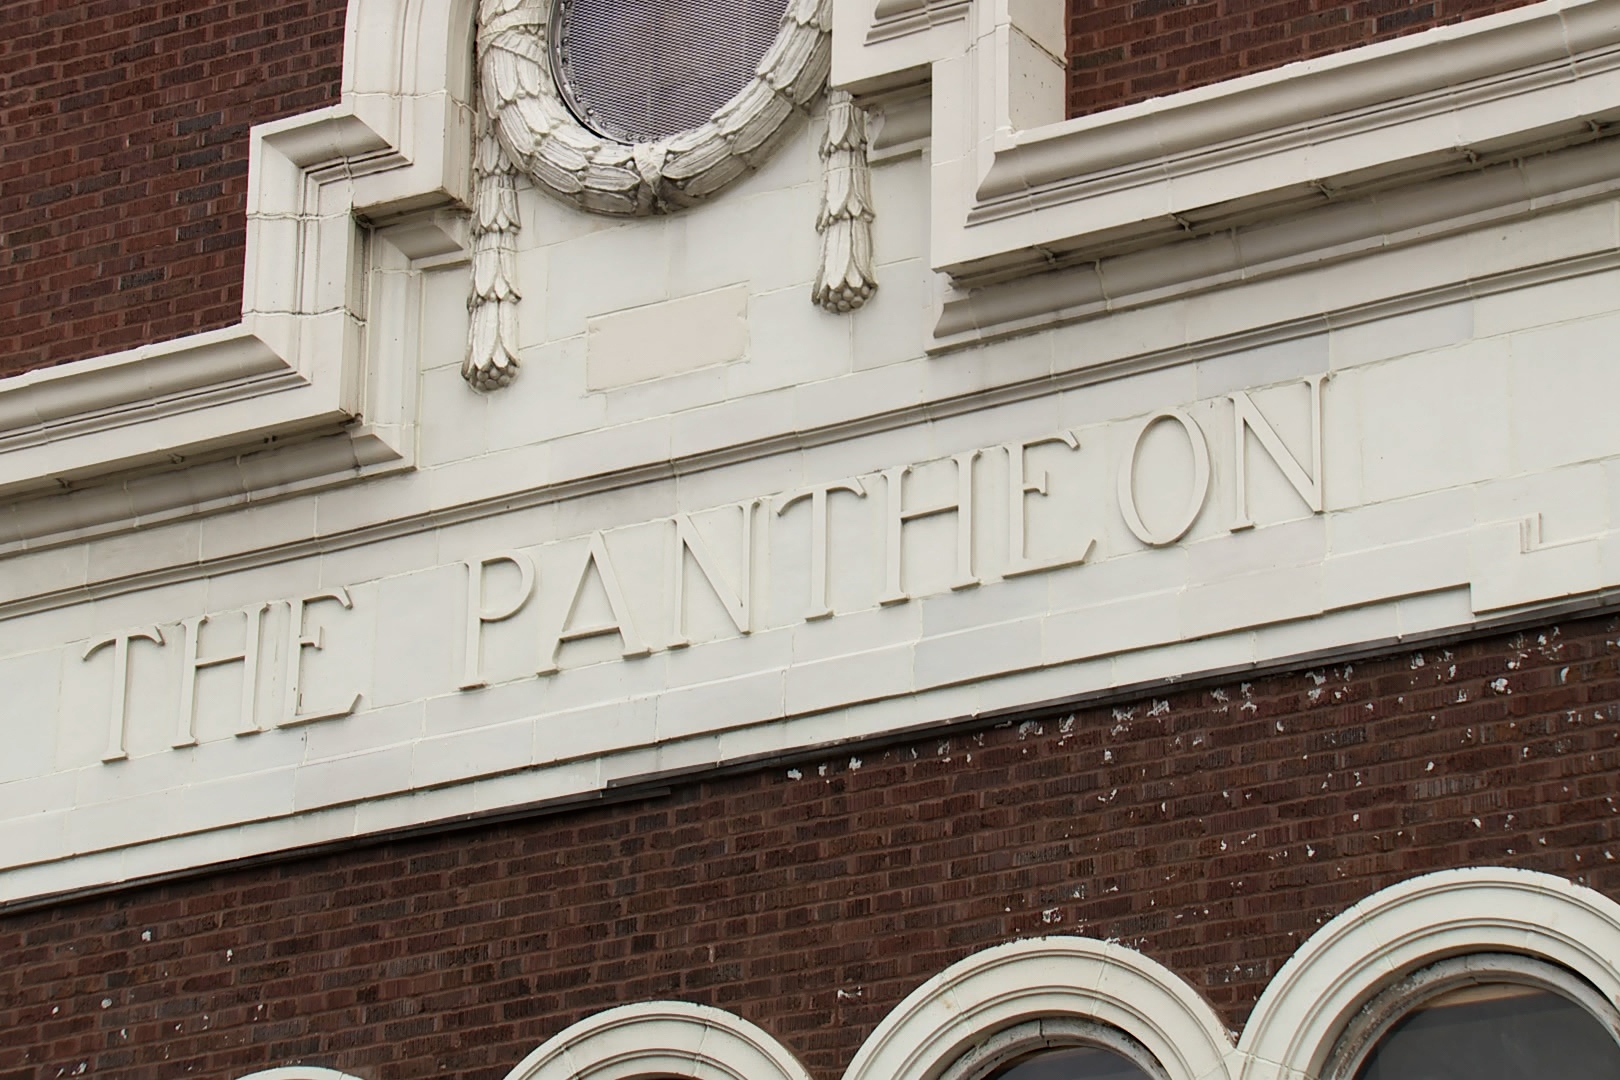 The Pantheon Theatre in Vincennes received a $732,000 grant to renovate the exterior.